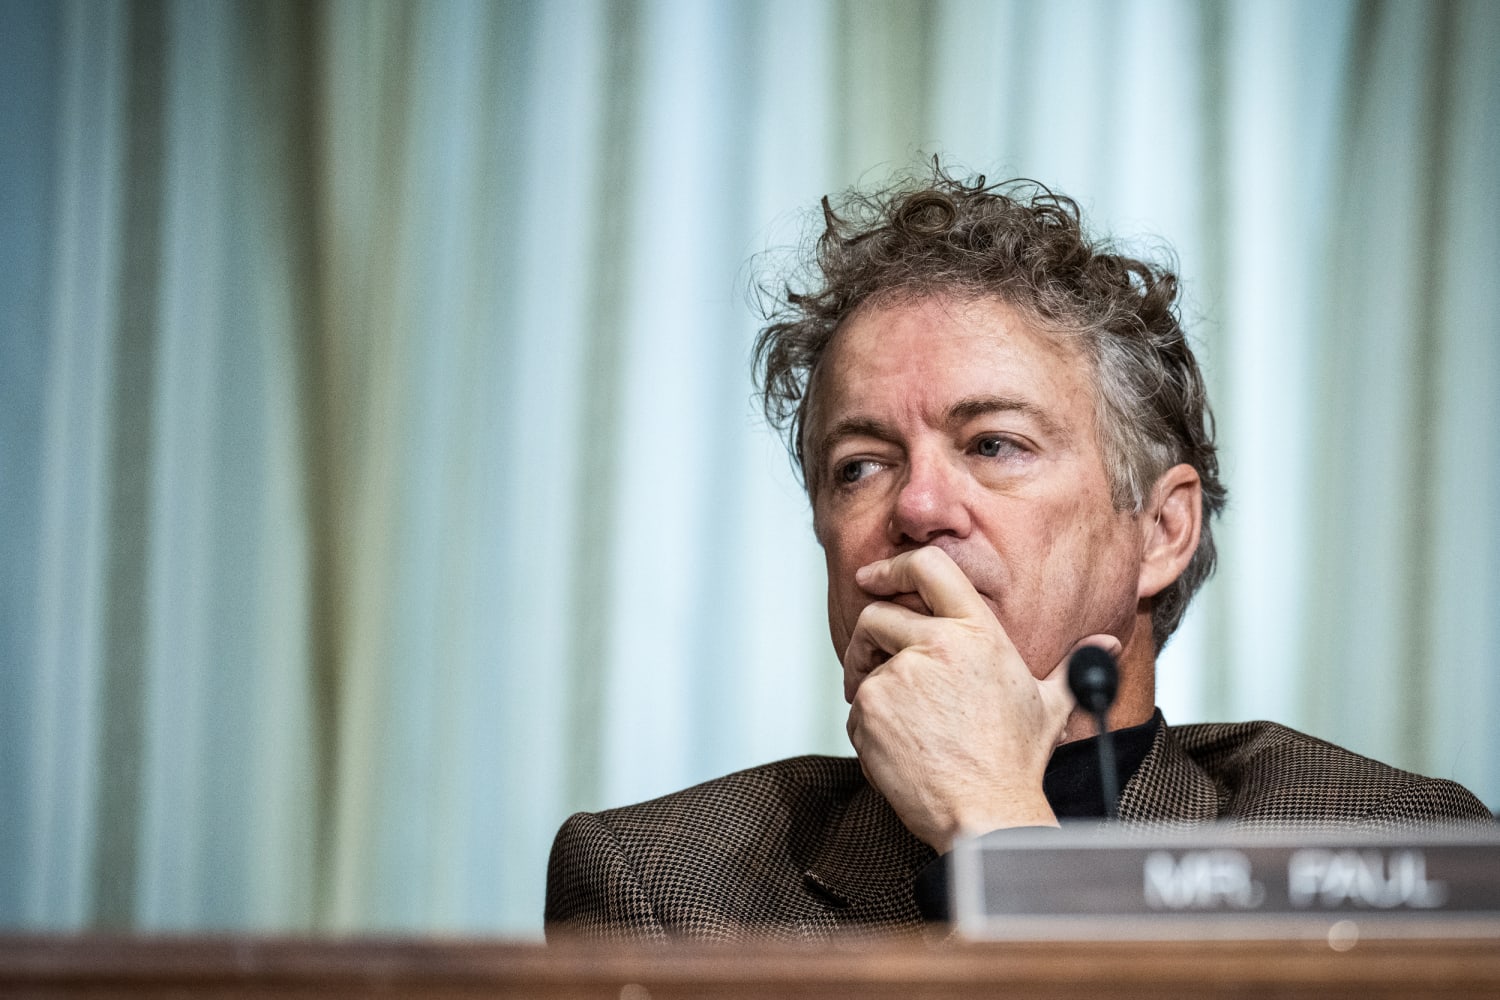 Rand Paul says he wouldn't give his children Covid vaccinations over myocarditis concerns